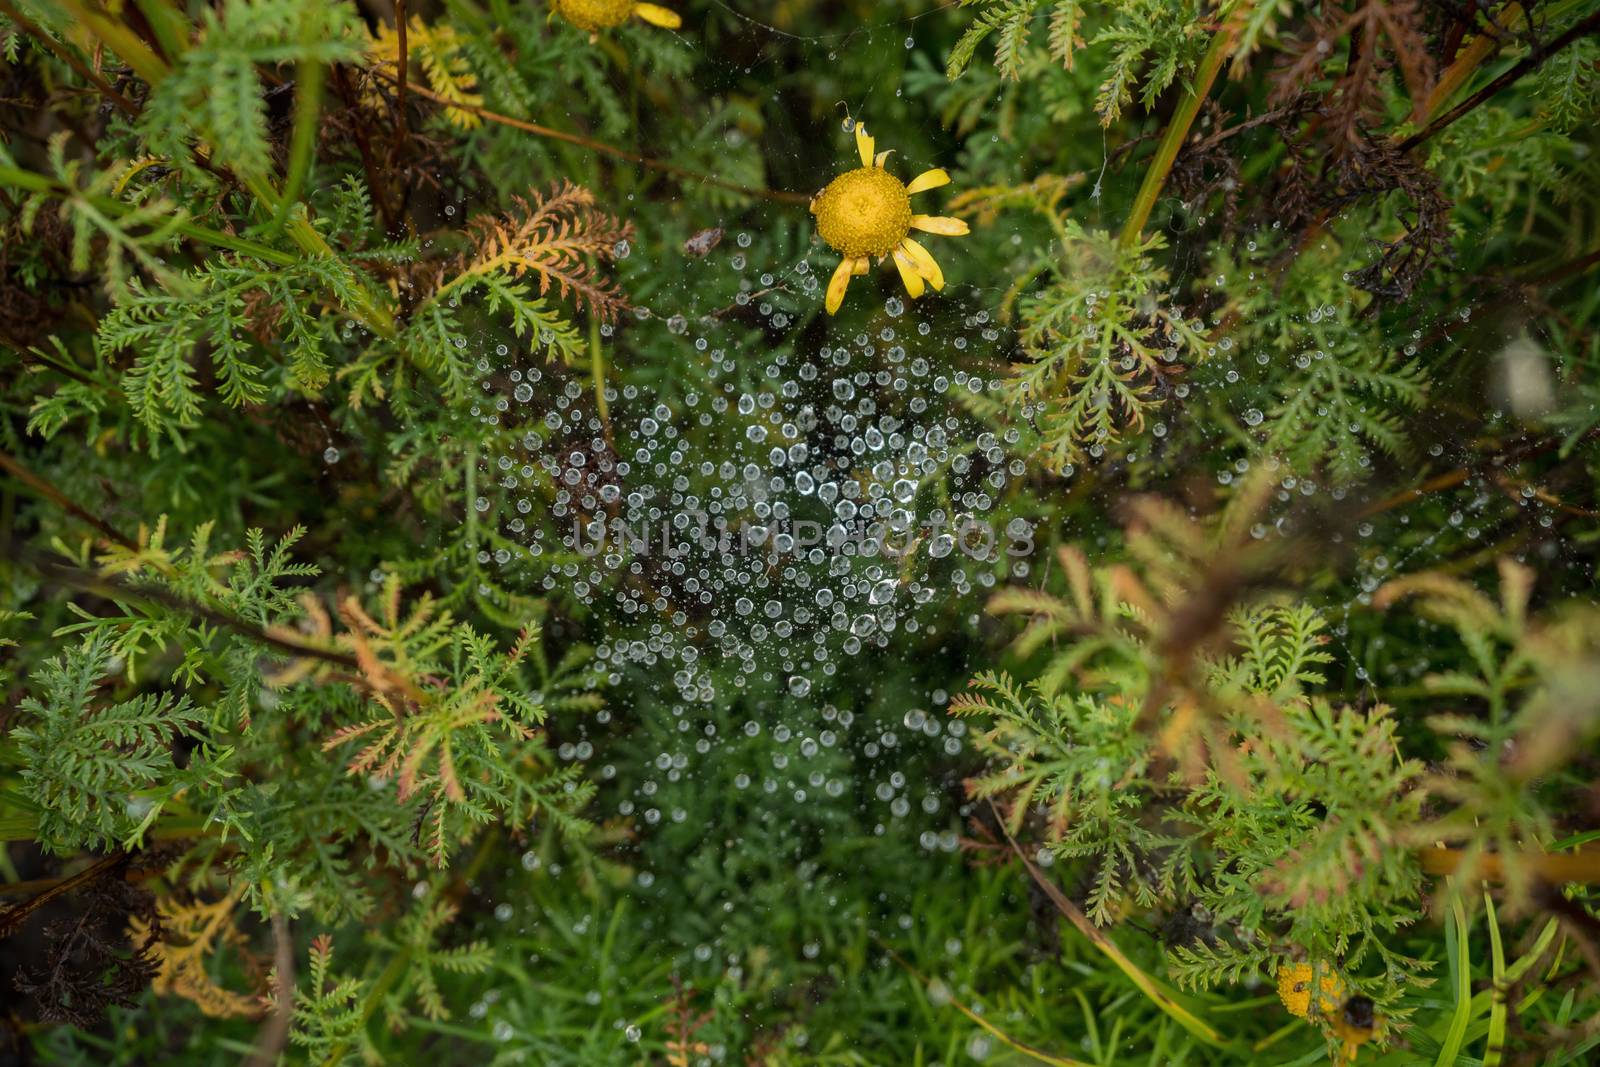 Spider web in the garden with rain drops